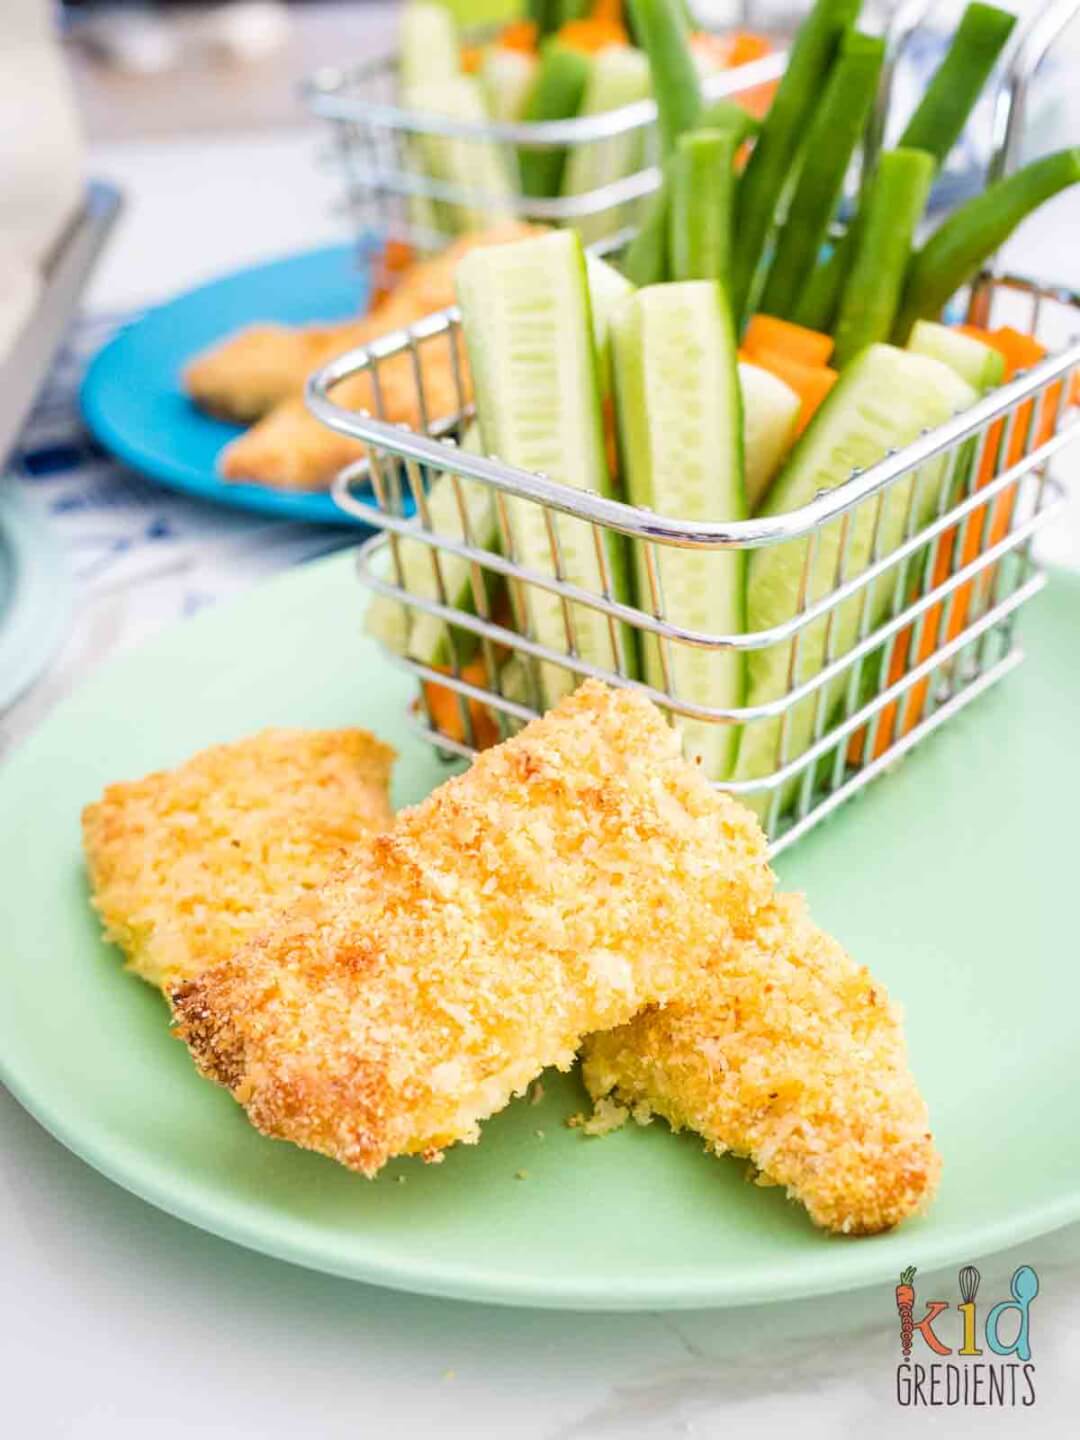 Homemade fish fingers on a green plate with veggies.